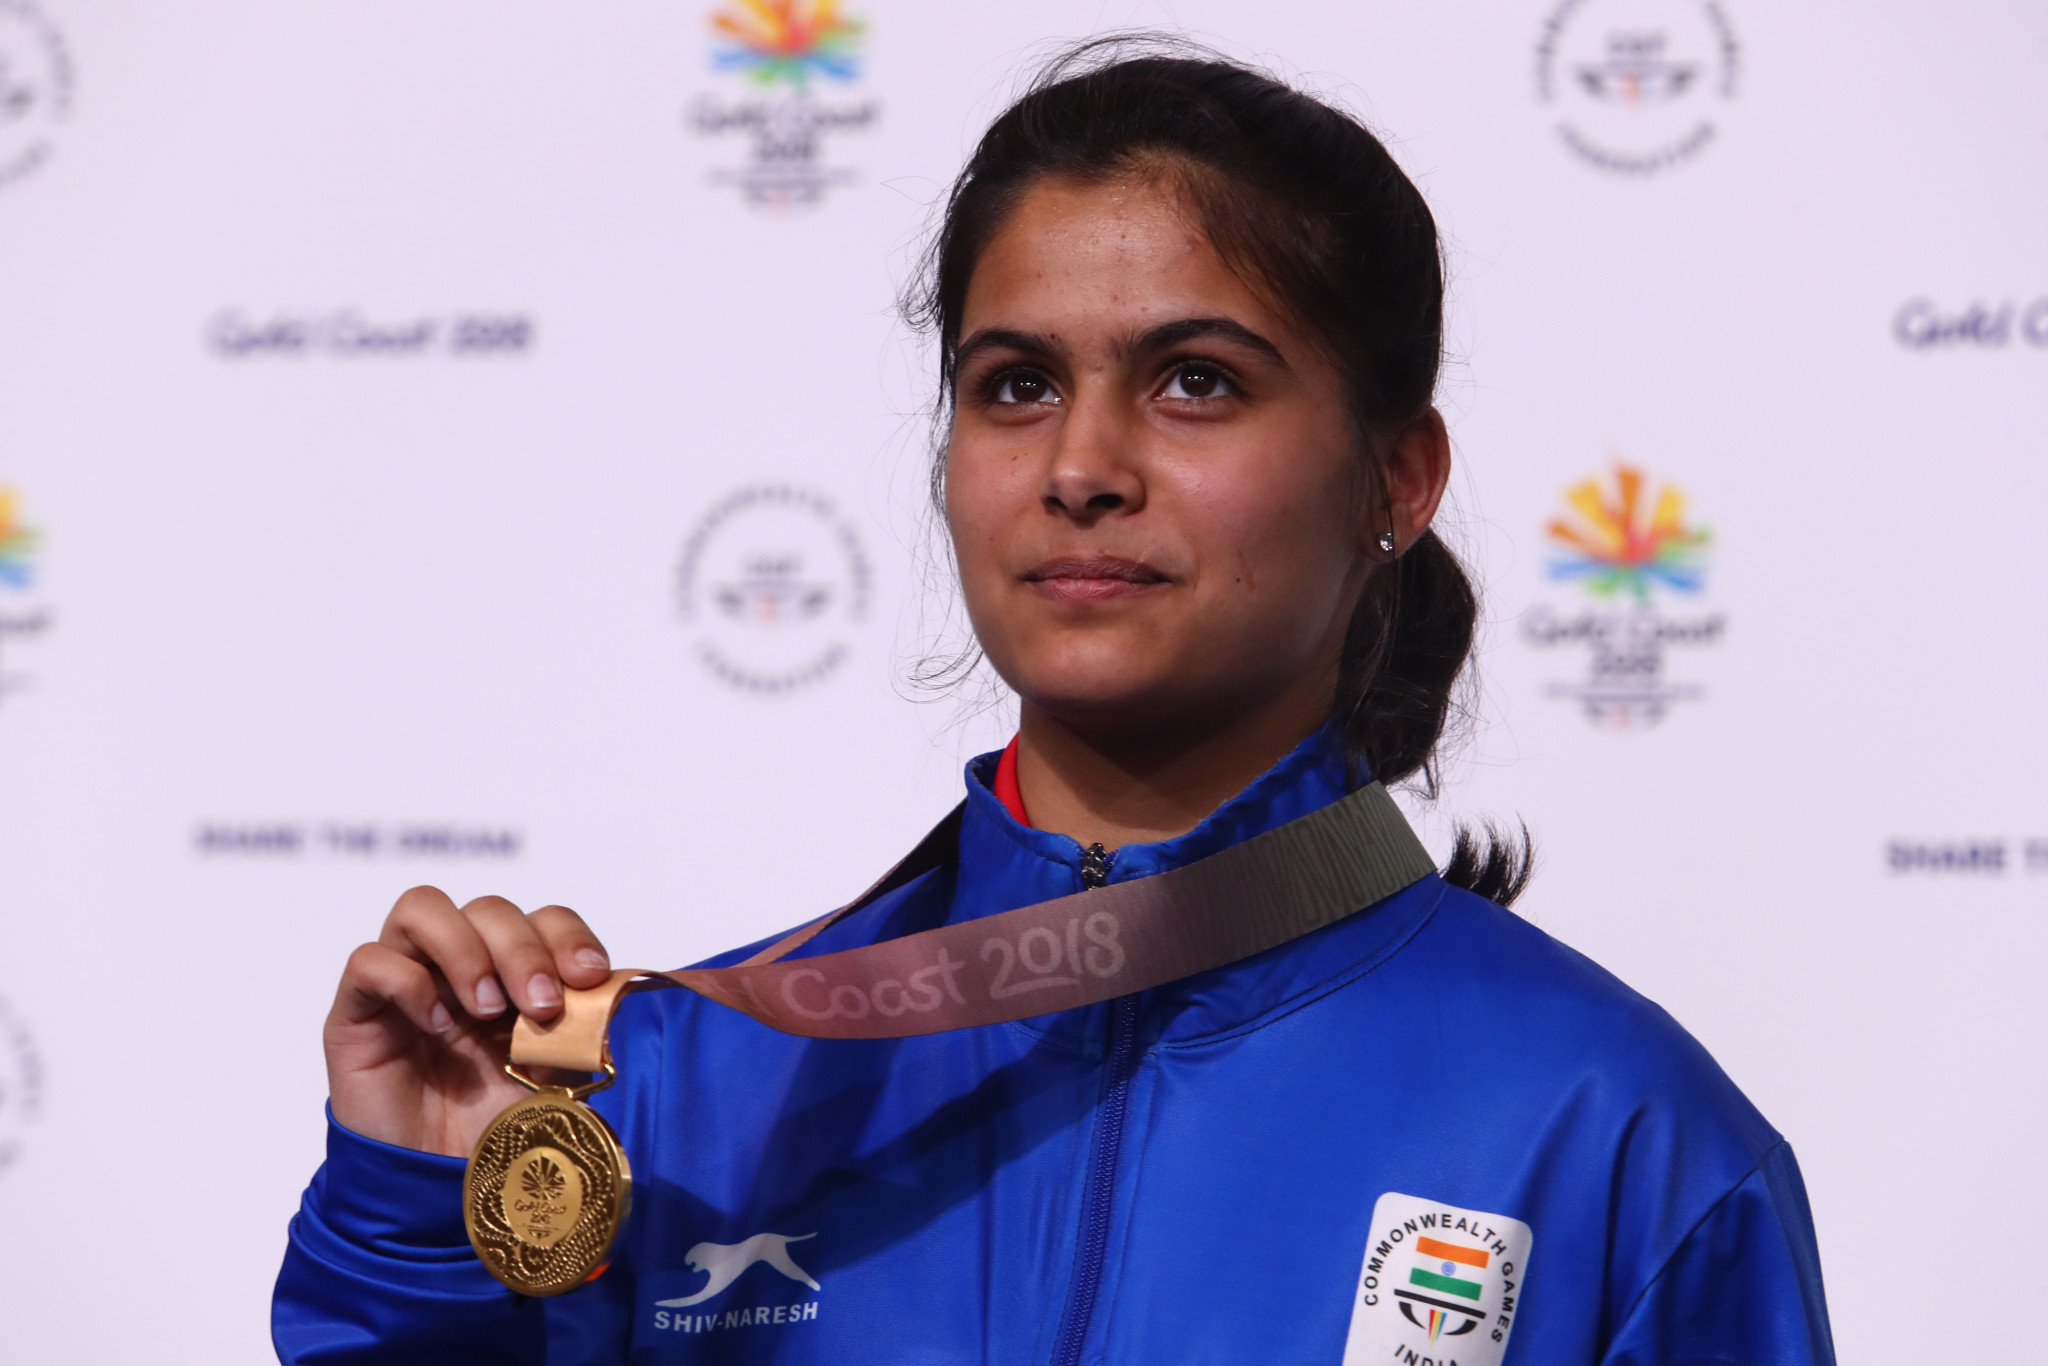 Commonwealth Games gold medallist chosen to carry Indian flag at Buenos Aires 2018 Opening Ceremony 